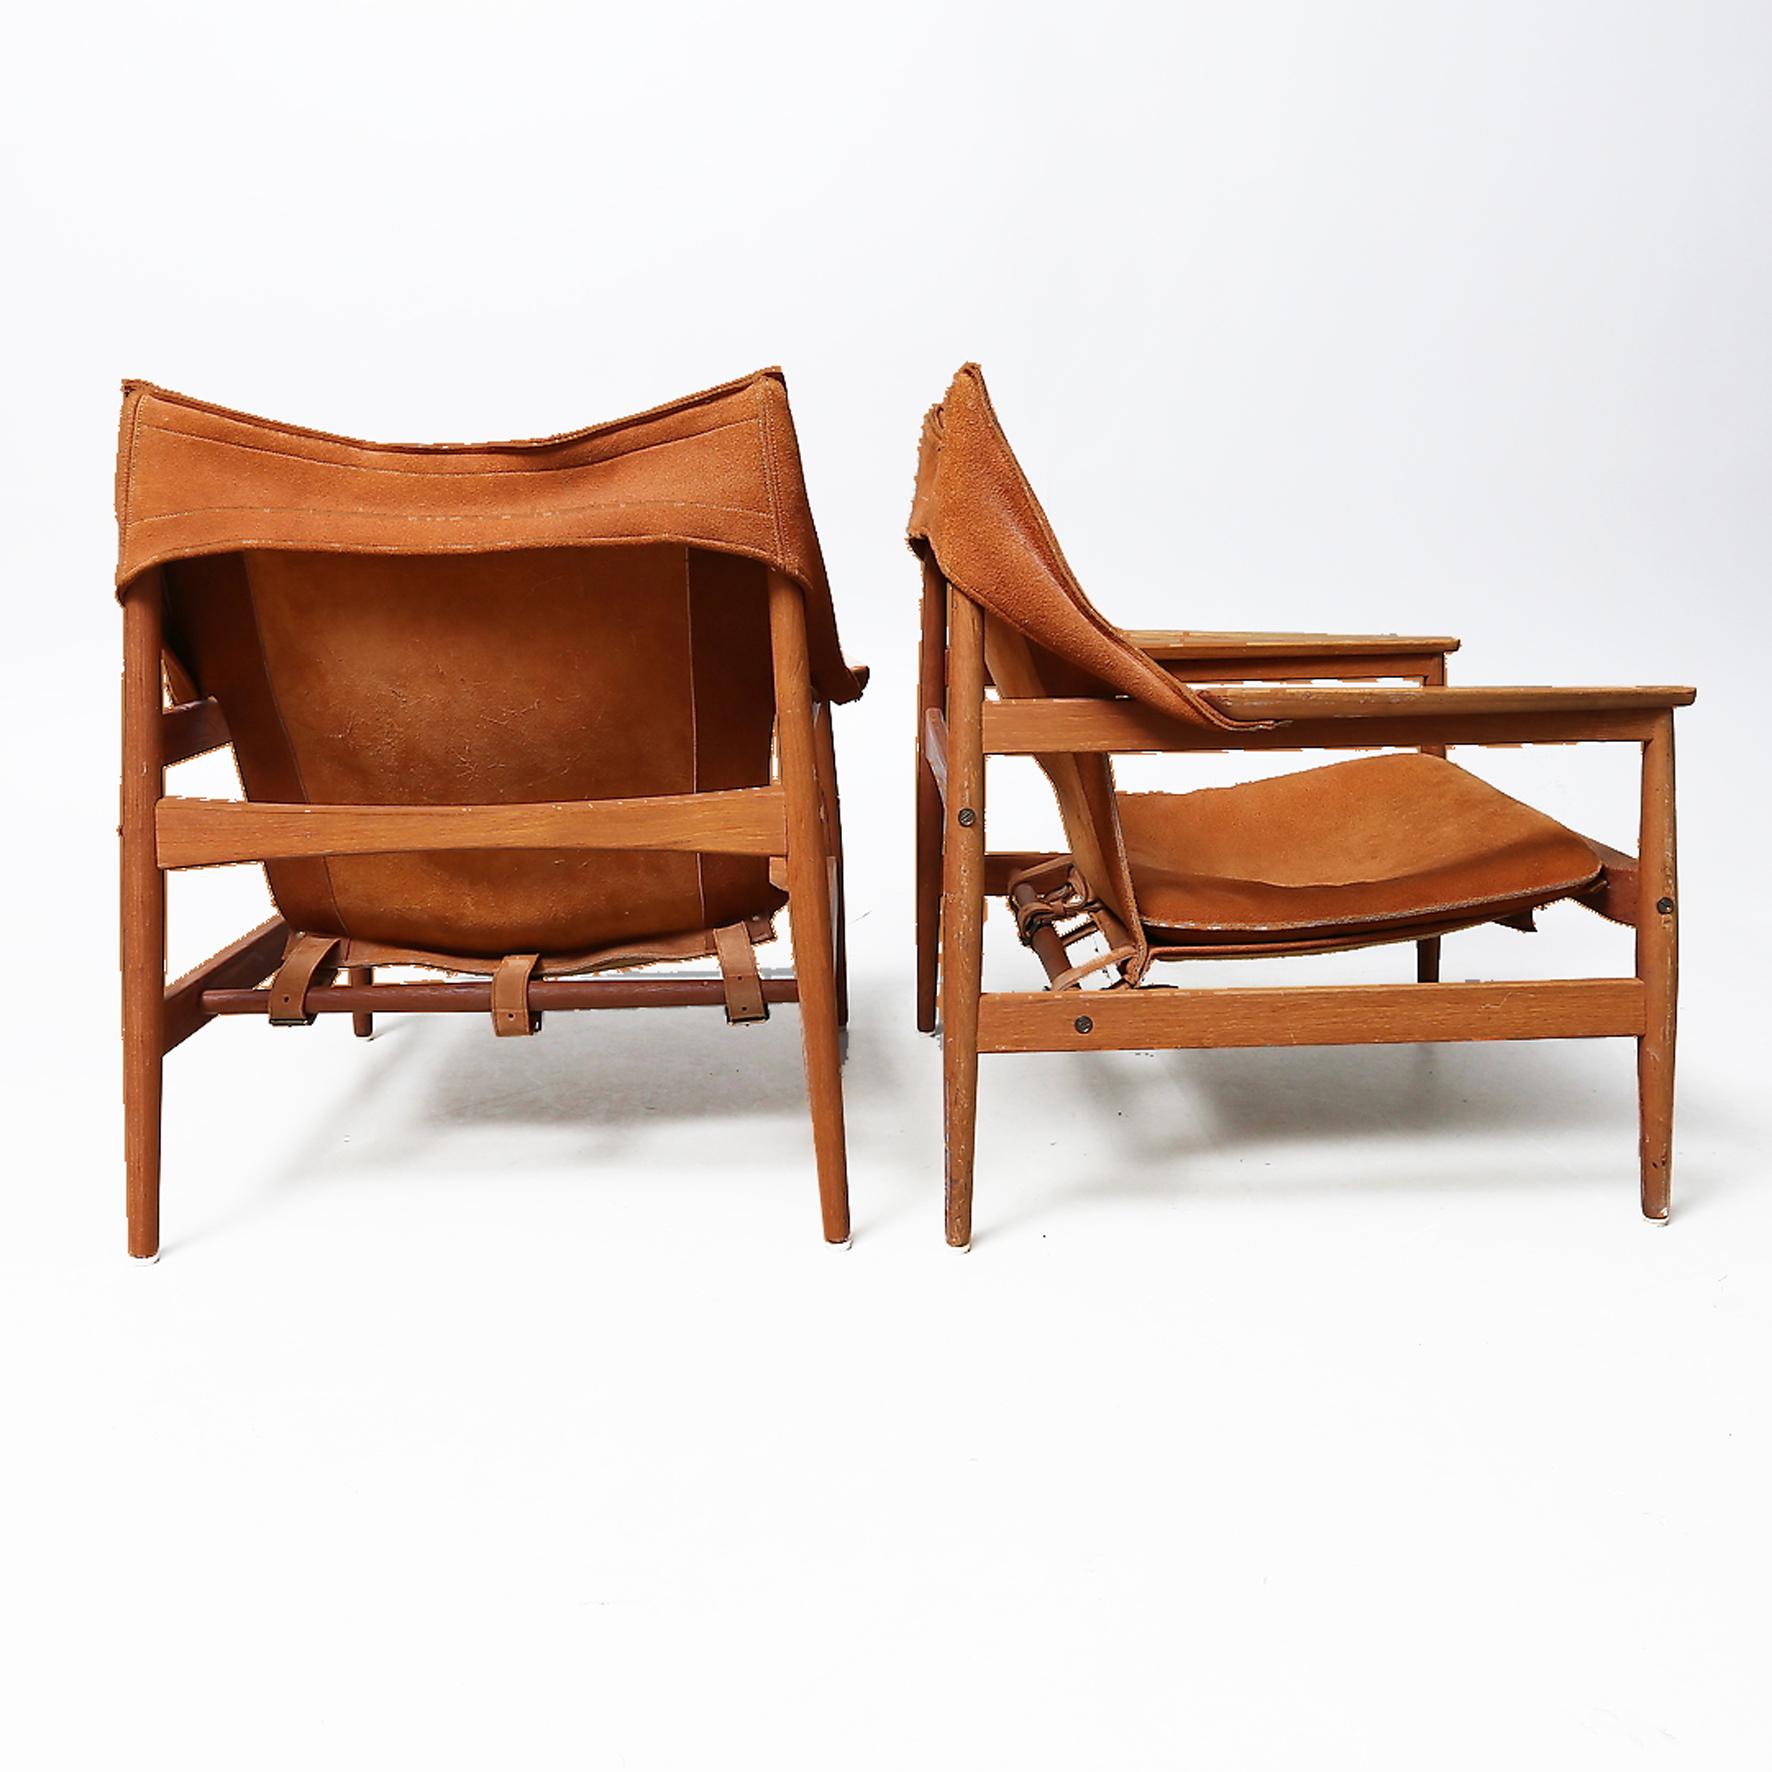 A rare and beautiful pair of sling armchairs.
The frame made of teak, the seat and back rest covered with brown suede.
Stamped 